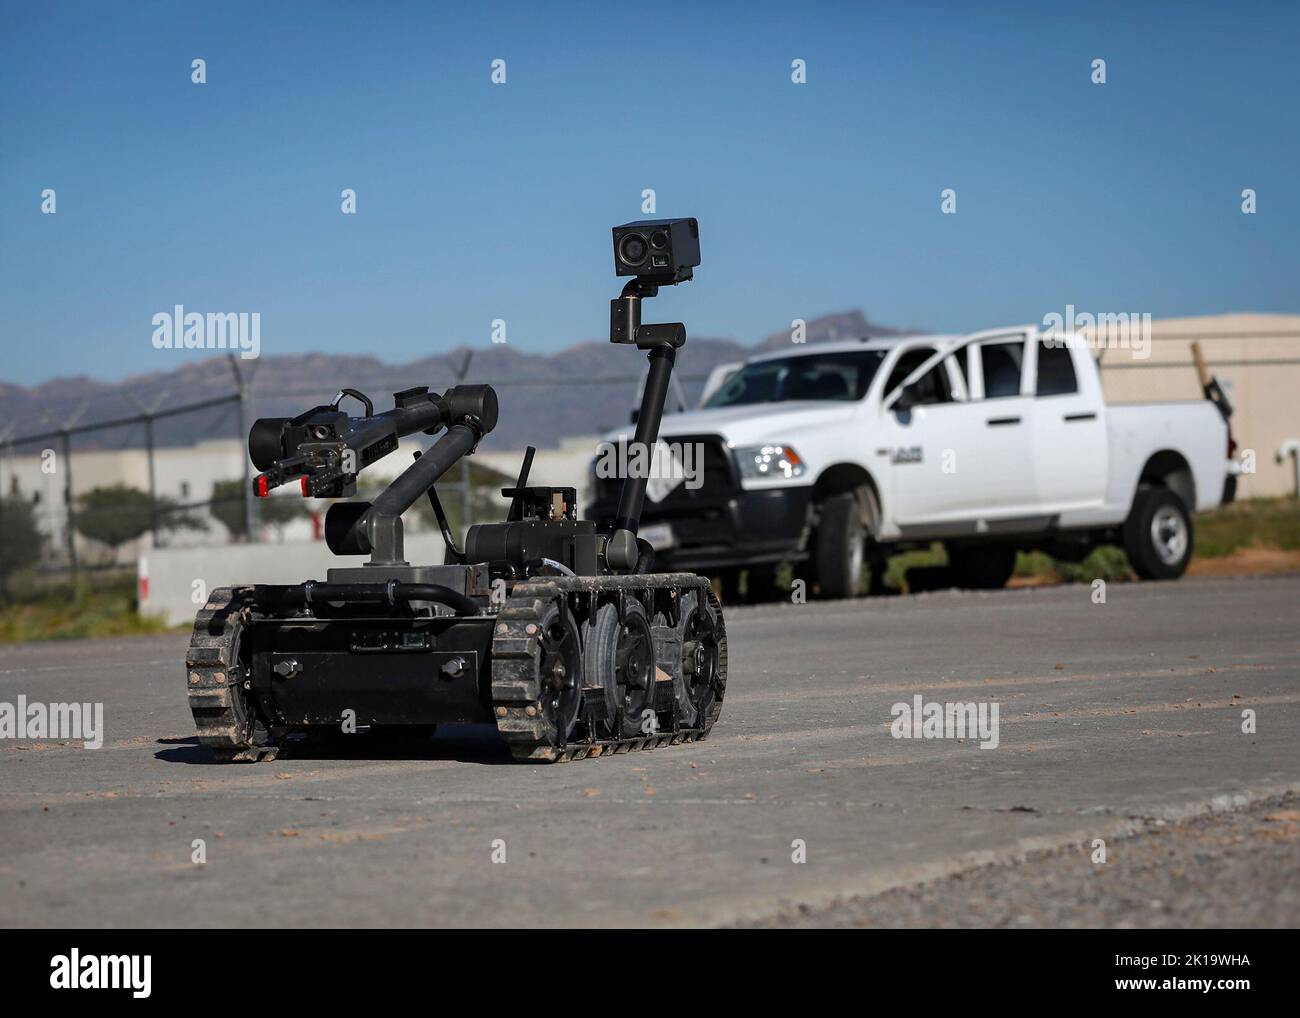 A Man Transportable Robotic System - Increment II robot, piloted by a 741st Ordnance Company (EOD) Soldier from a safe distance, works its way toward a simulated bomb site during a training event at Fort Bliss, Texas, Sept. 14, 2022. Team Bliss and its partners regularly hold installation exercises to stay sharp when it comes to swift and effective emergency response. Stock Photo